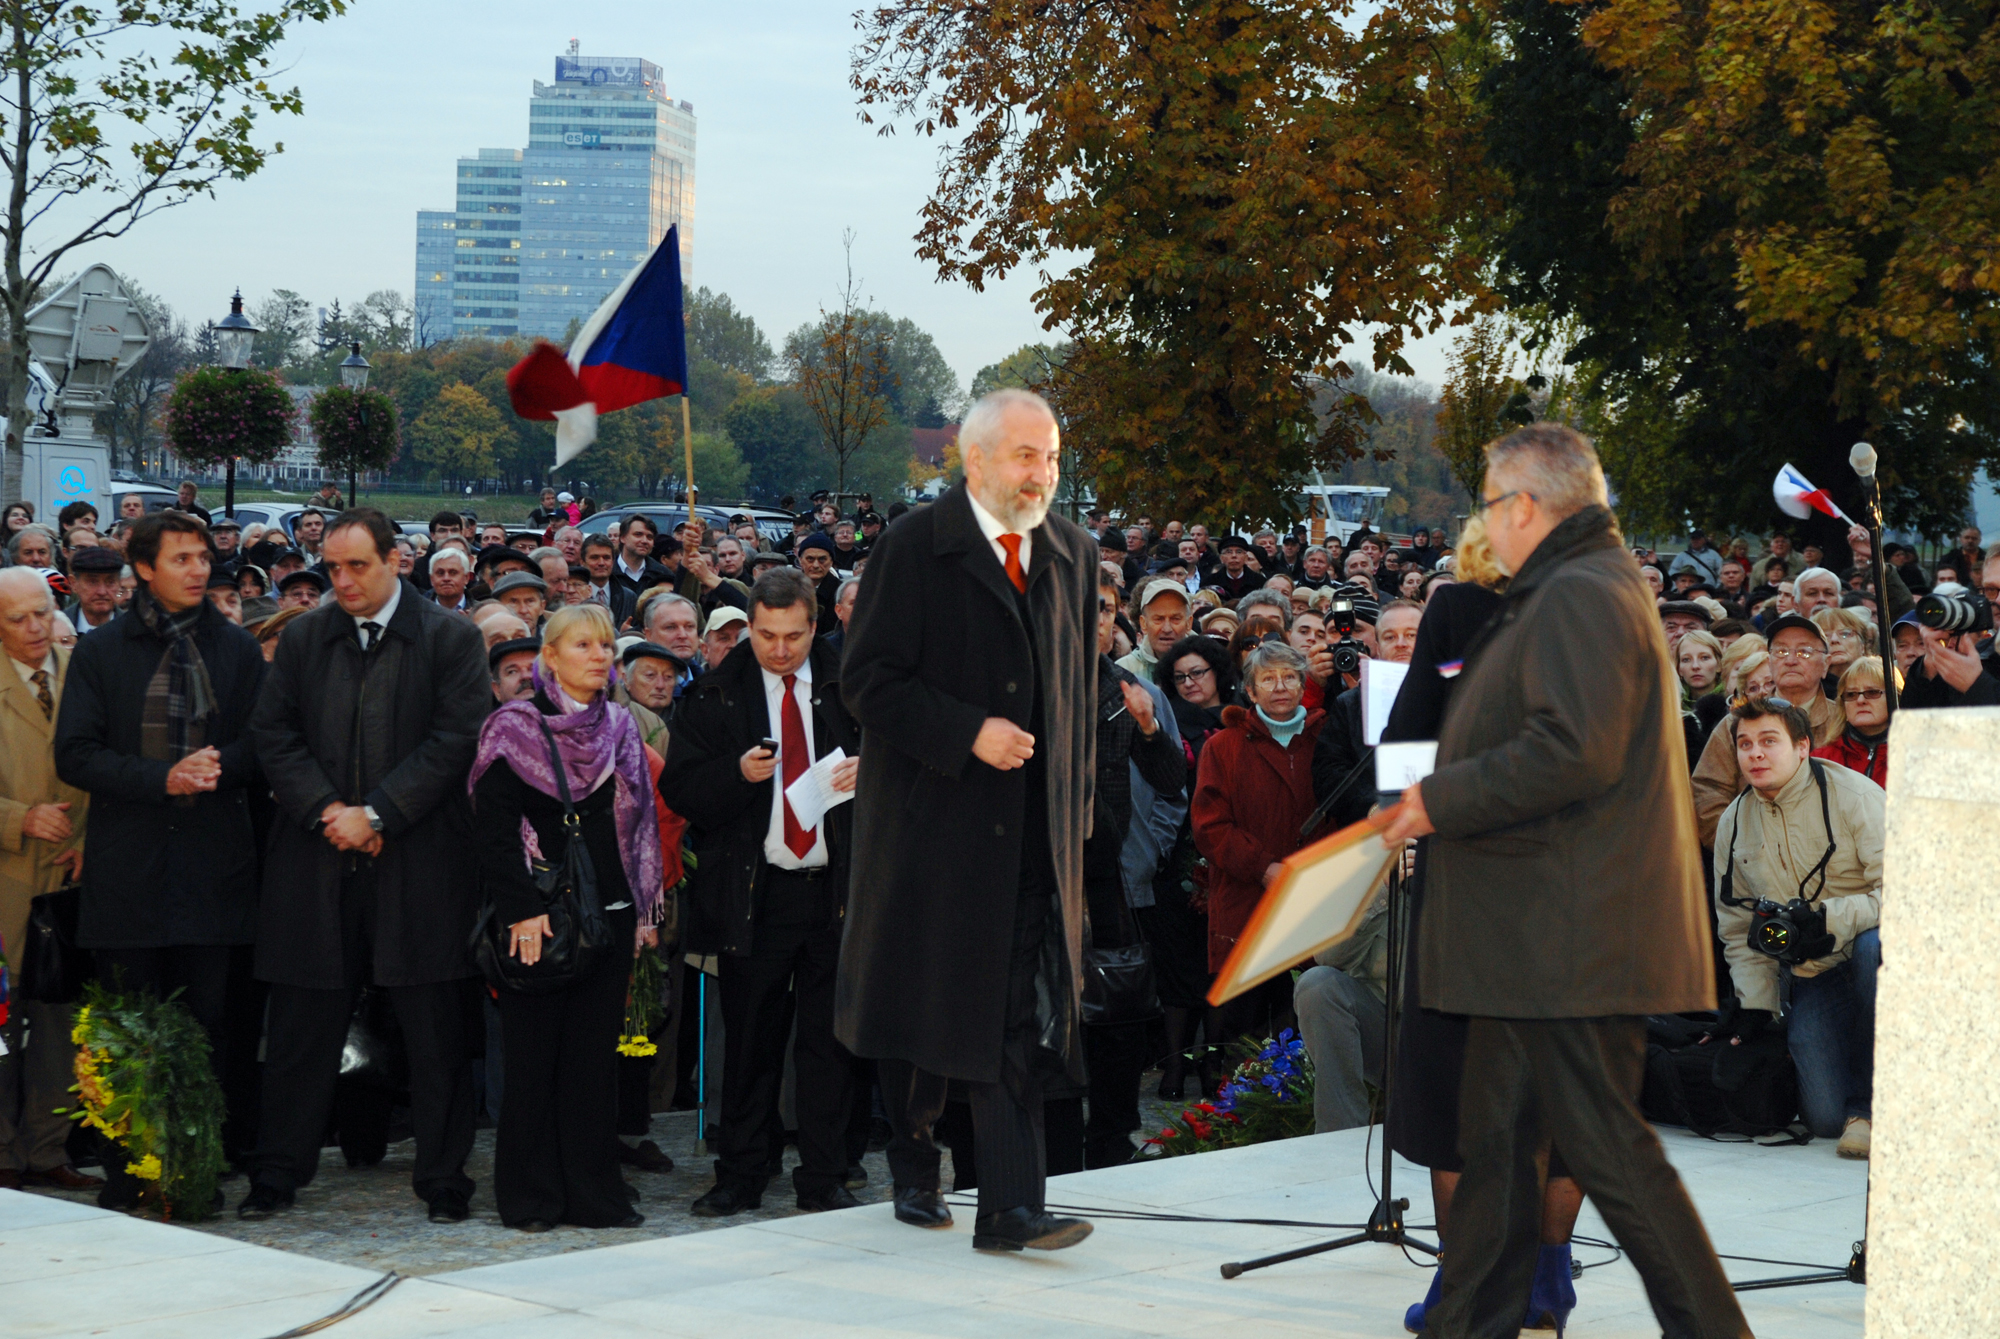 there is a man that is at a microphone and another person standing near a flagpole